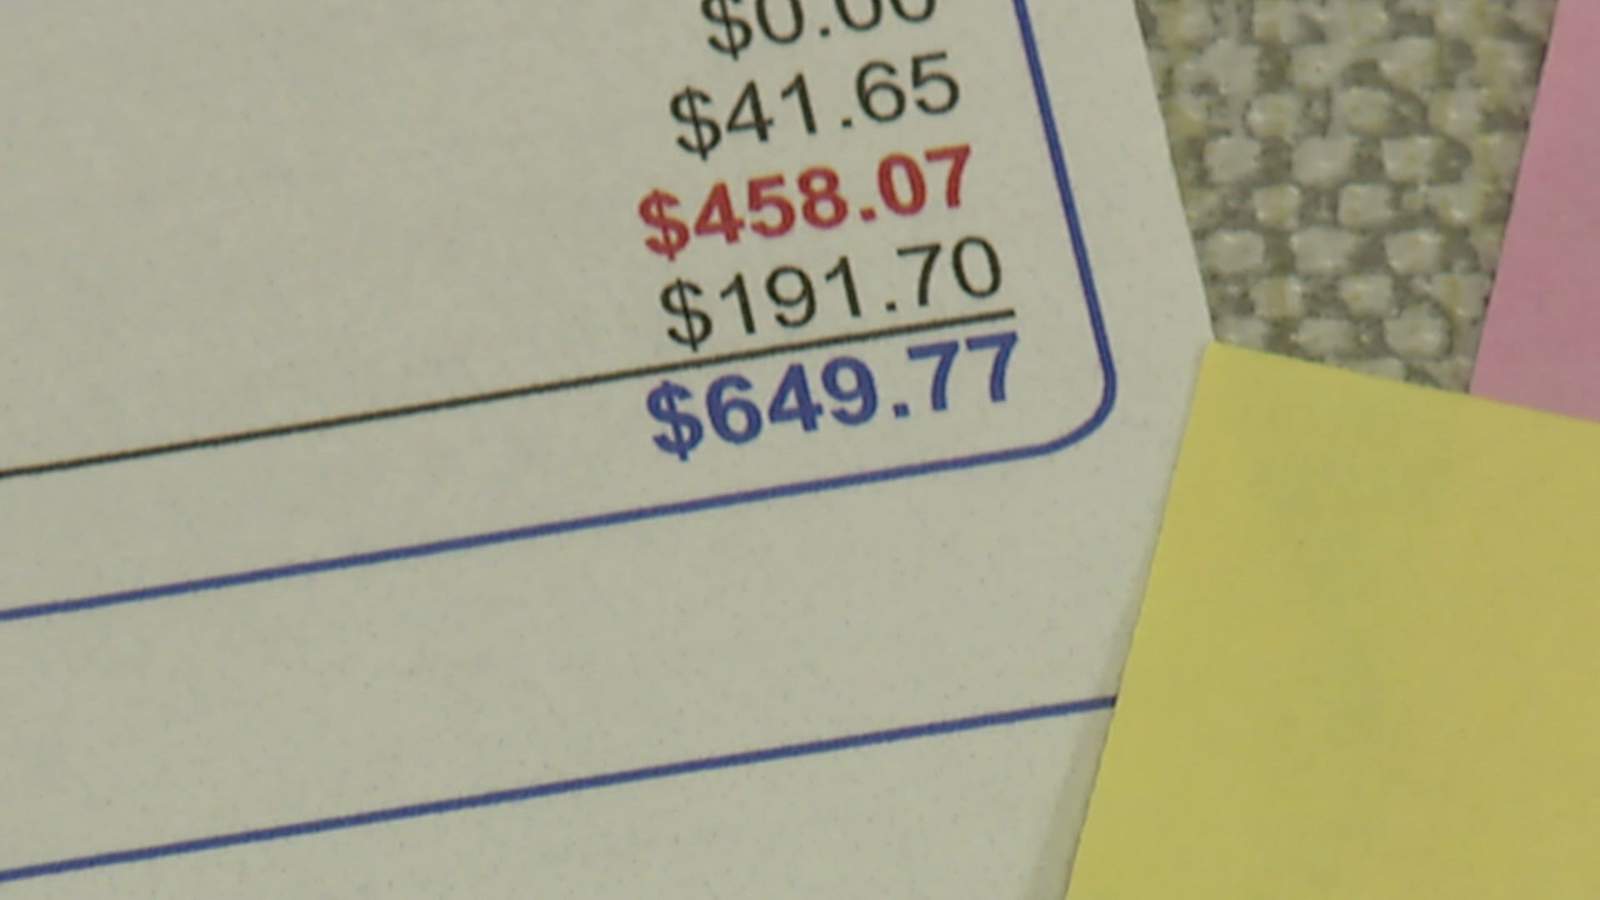 Spencer Solves It: KPRC 2 viewers in Pearland want answers after high water bills